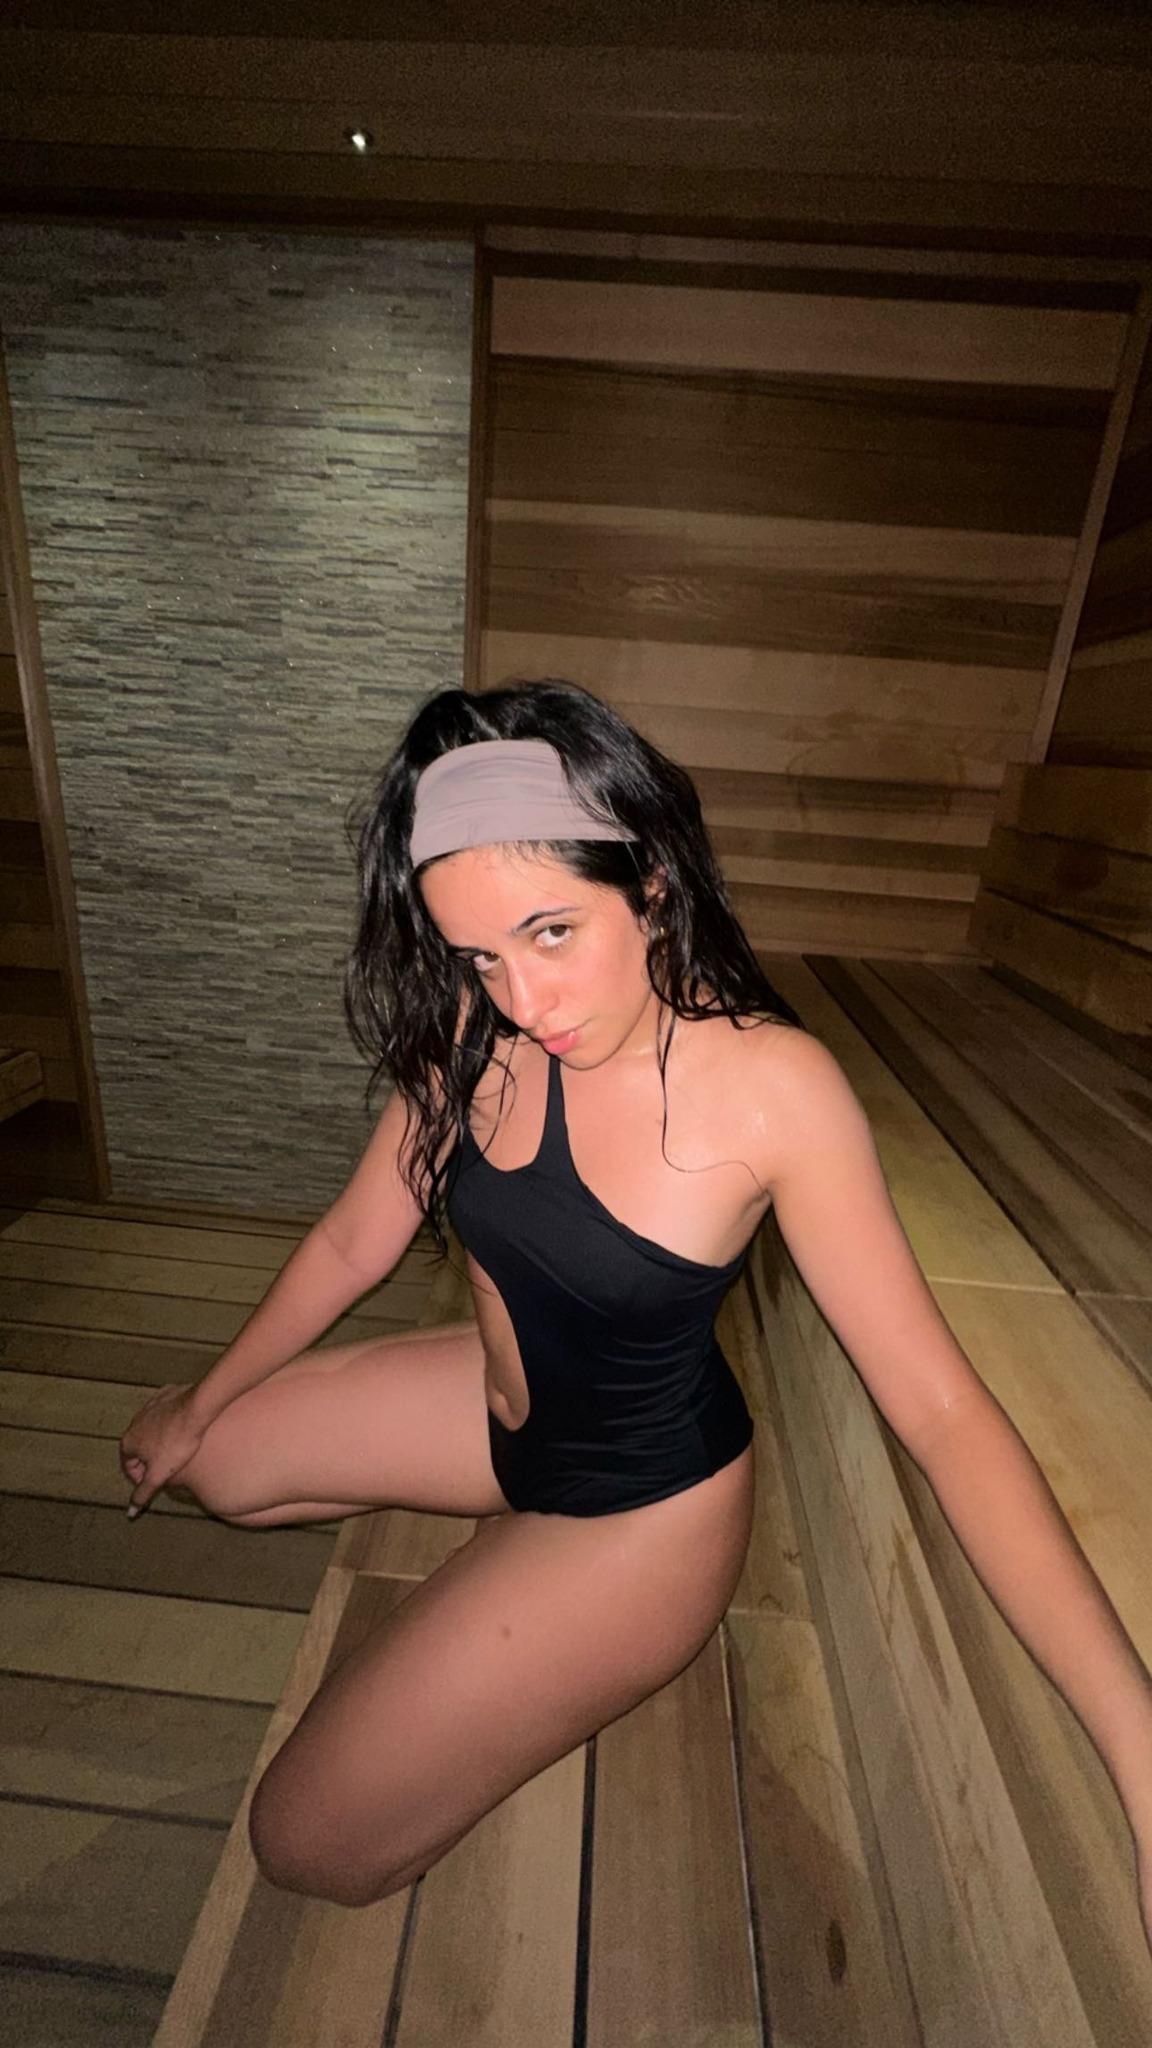 Camila Cabello Squats In A Racy Cut-Out Swimsuit At A Sauna